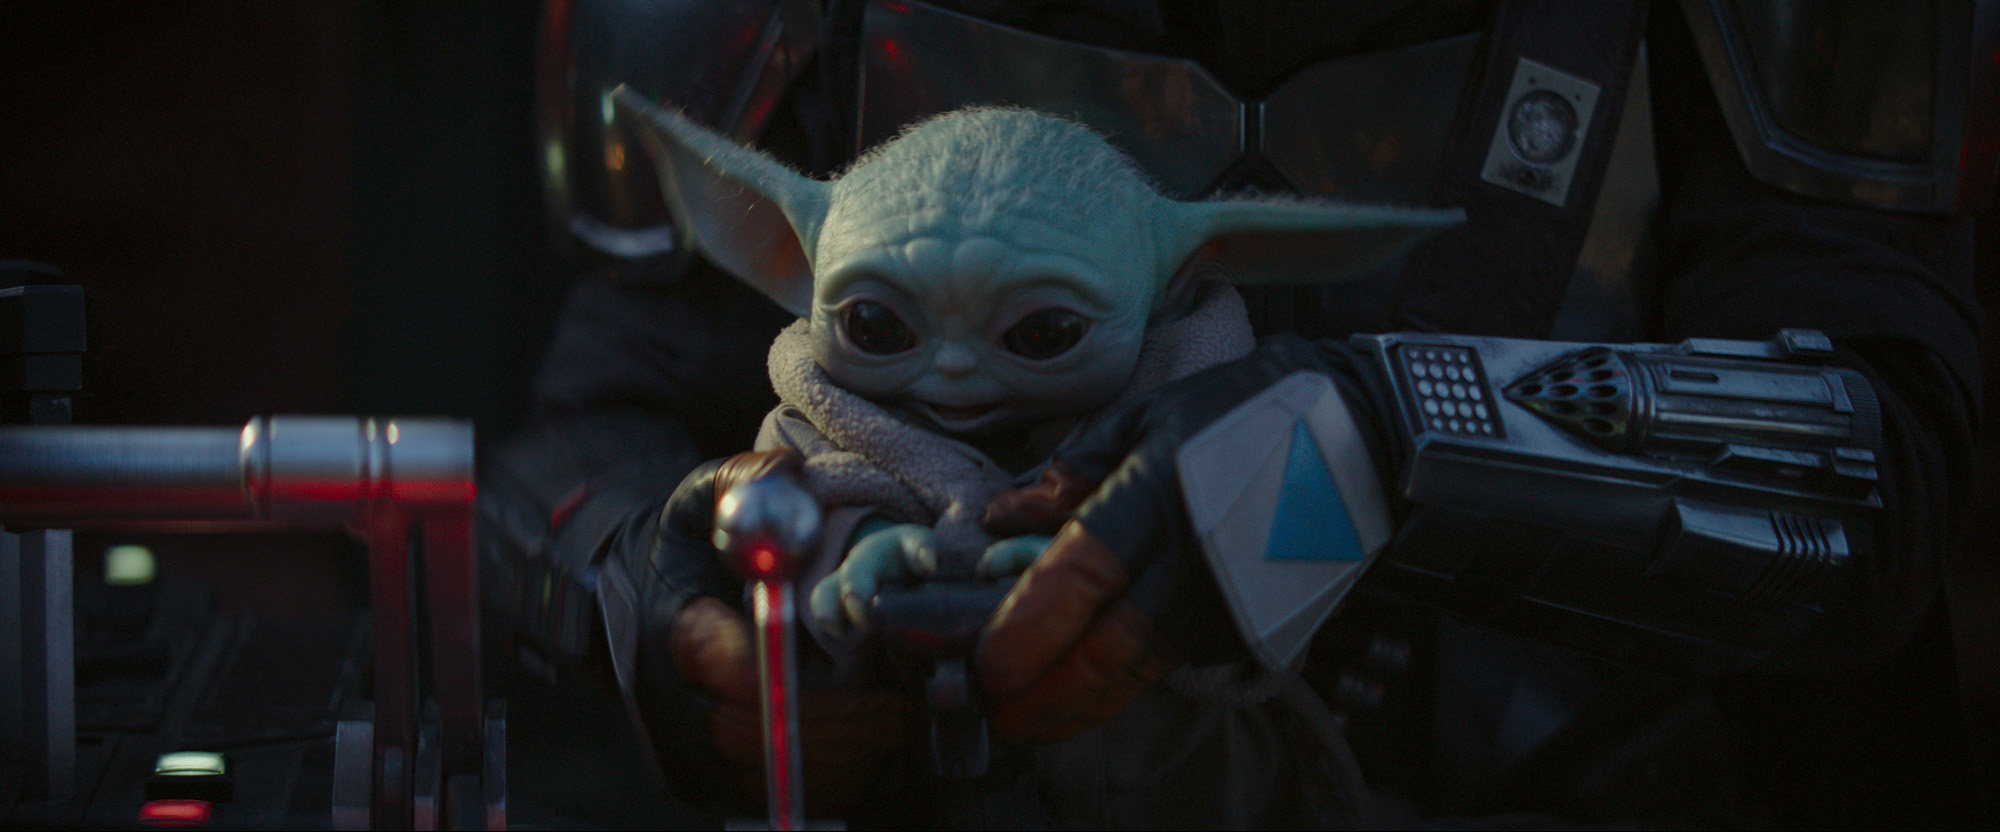 Baby Yoda is the breakout star of The Mandalorian on Disney+. The streaming services launches in Hong Kong, Taiwan and South Korea in November. Photo: Disney/TNS